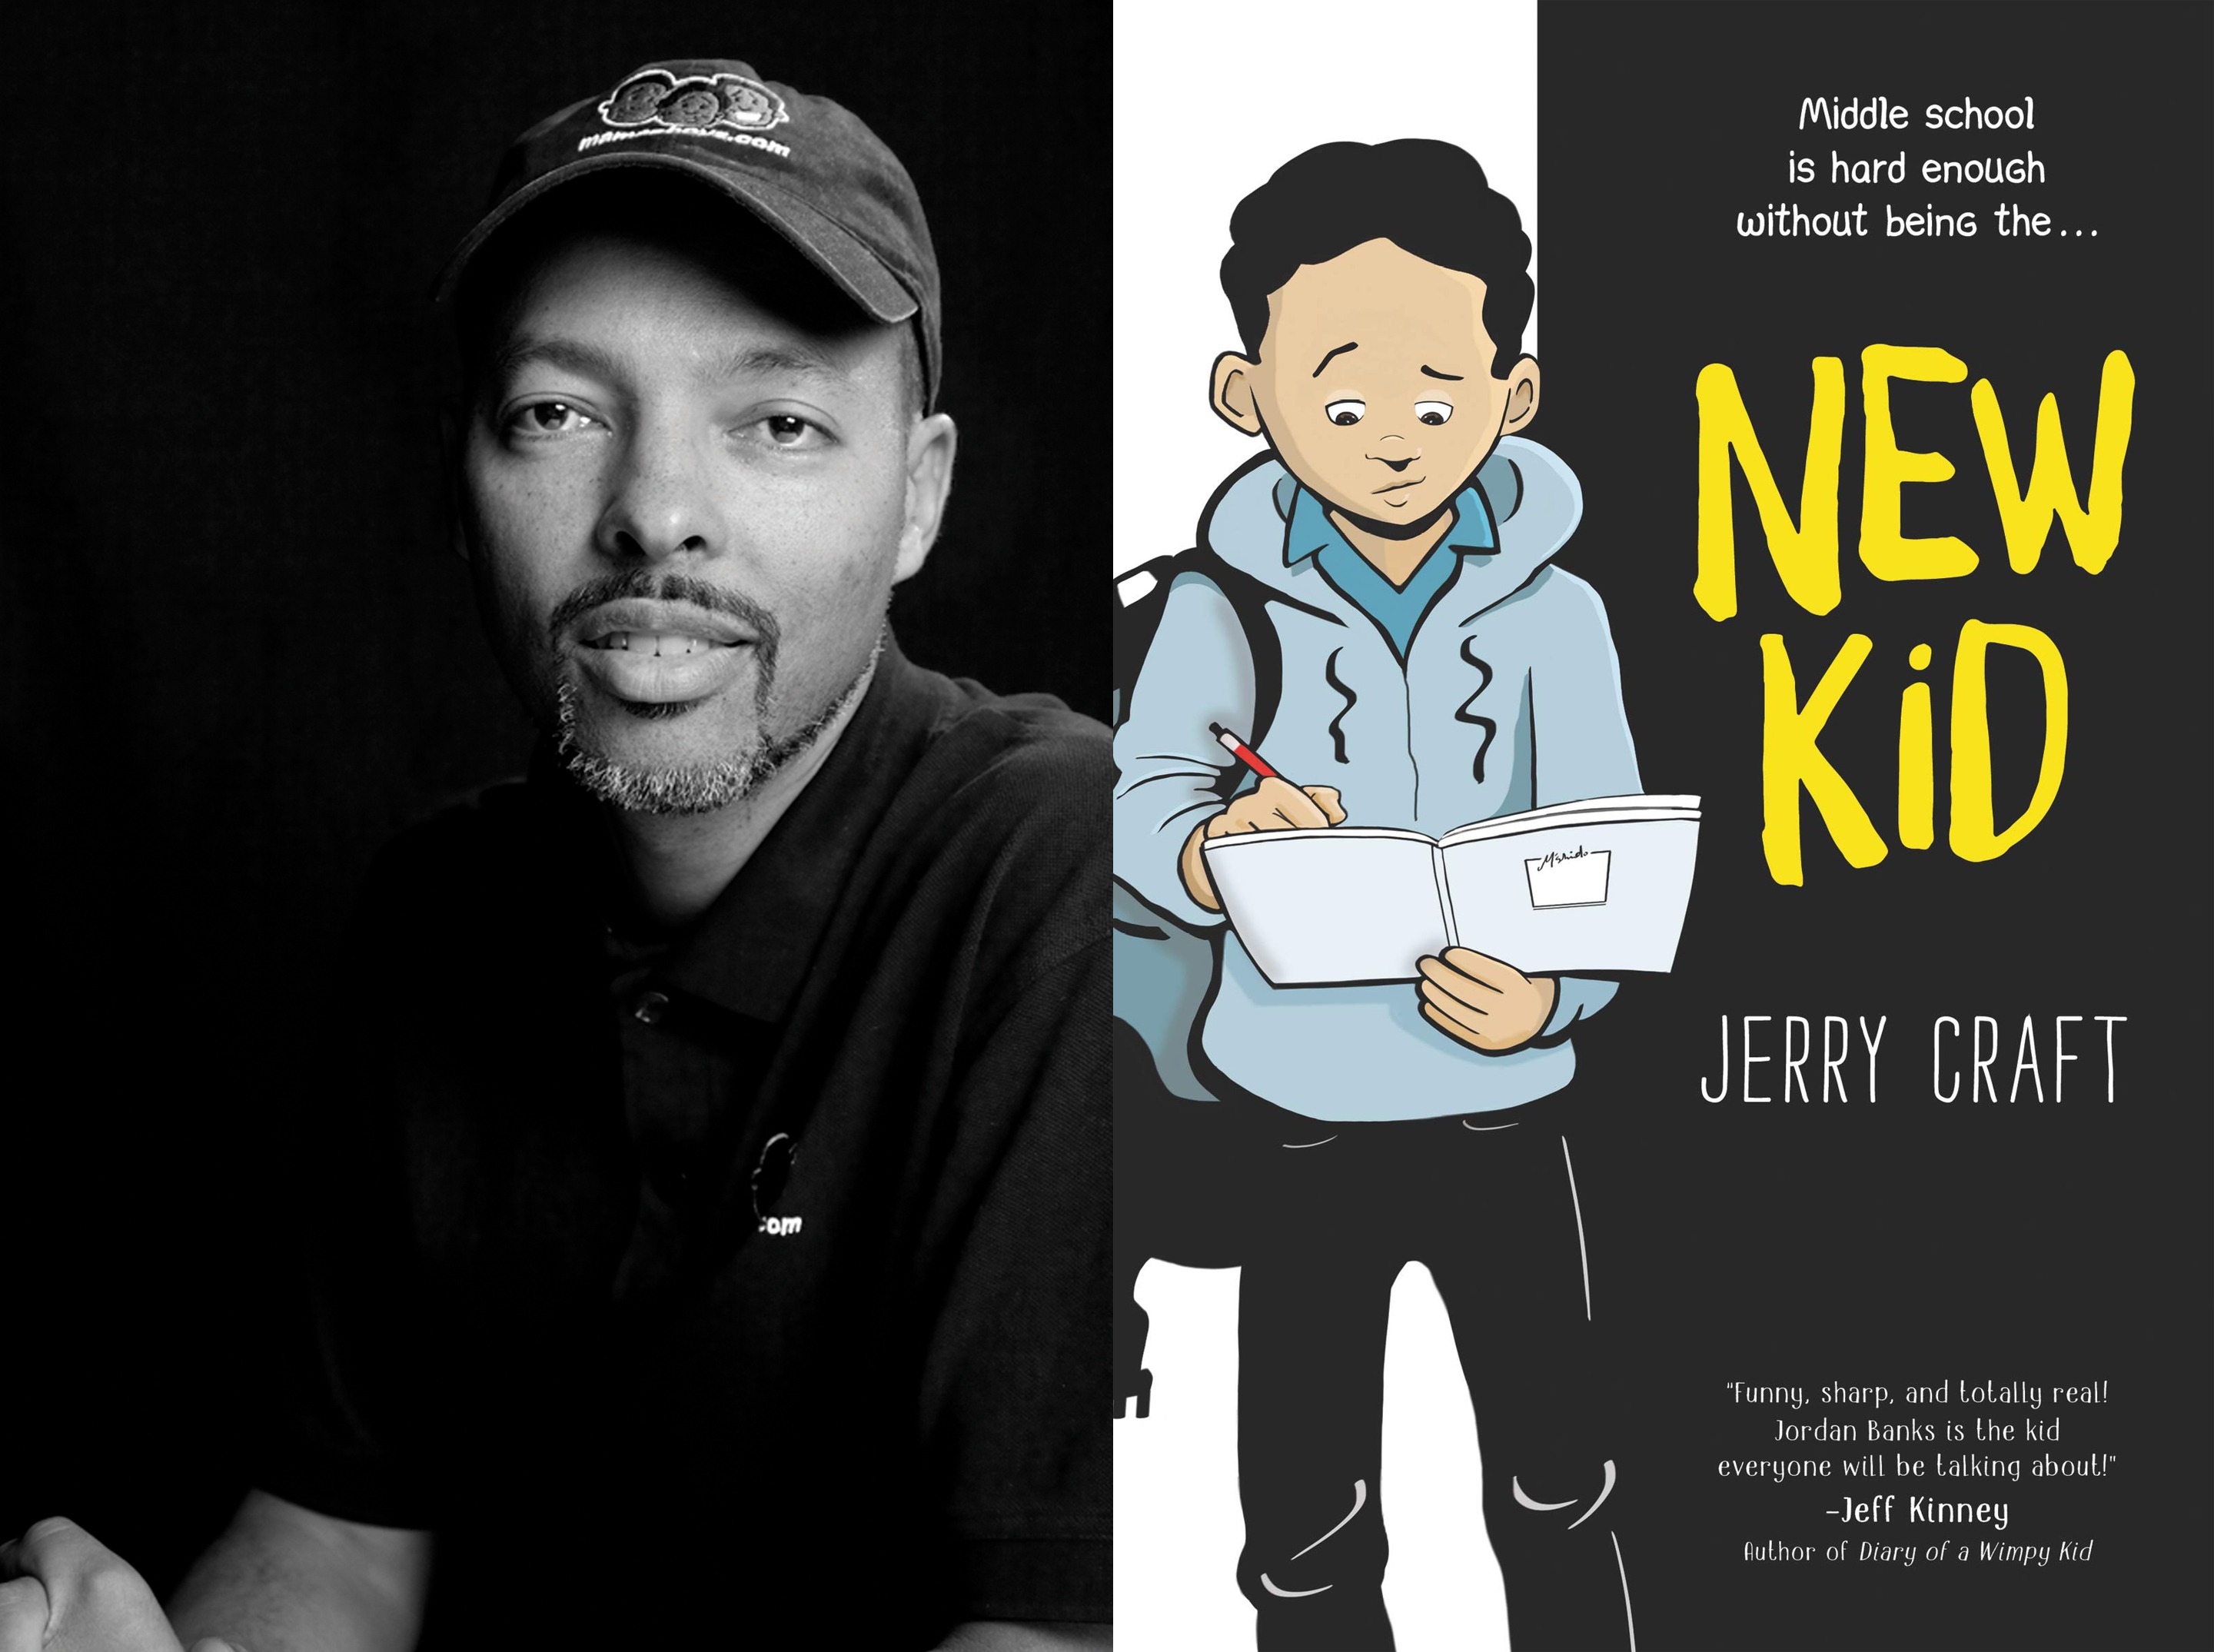 black and white image of Jerry Craft on the left. On the right, the book cover of his children's book NEW KID.